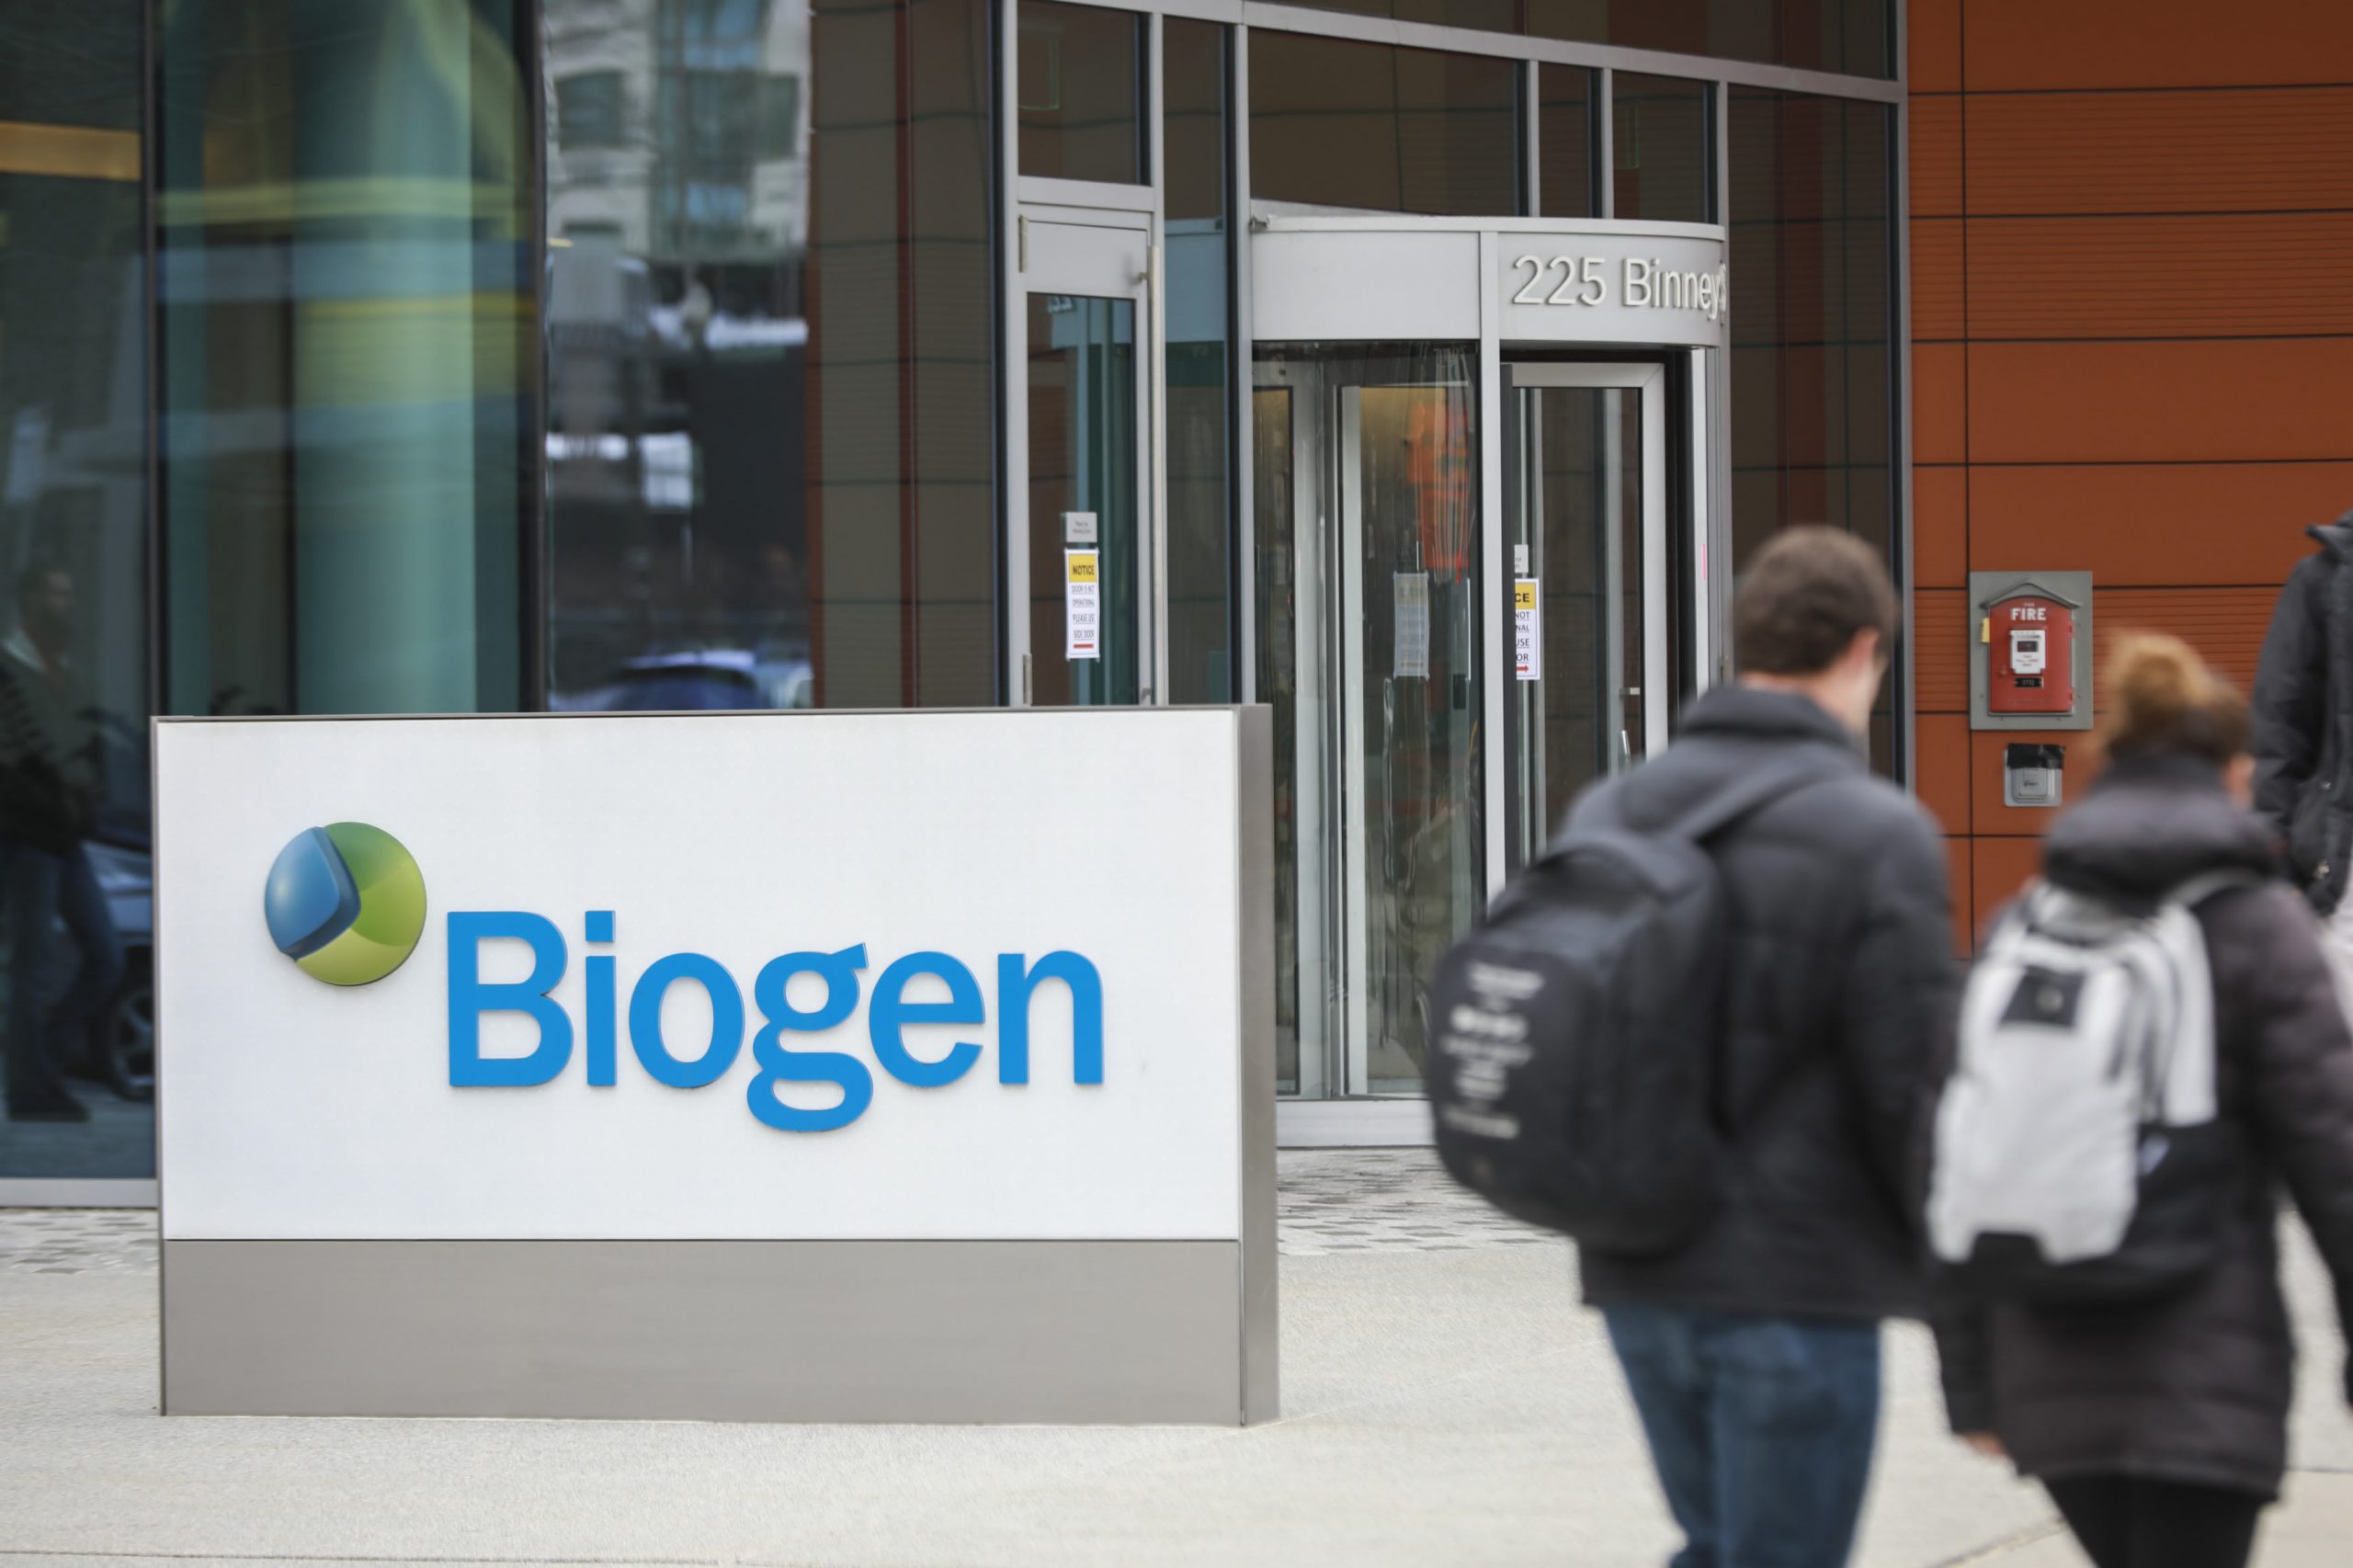 Biogen hits snag after Alzheimer’s drug fails to win help from FDA panel